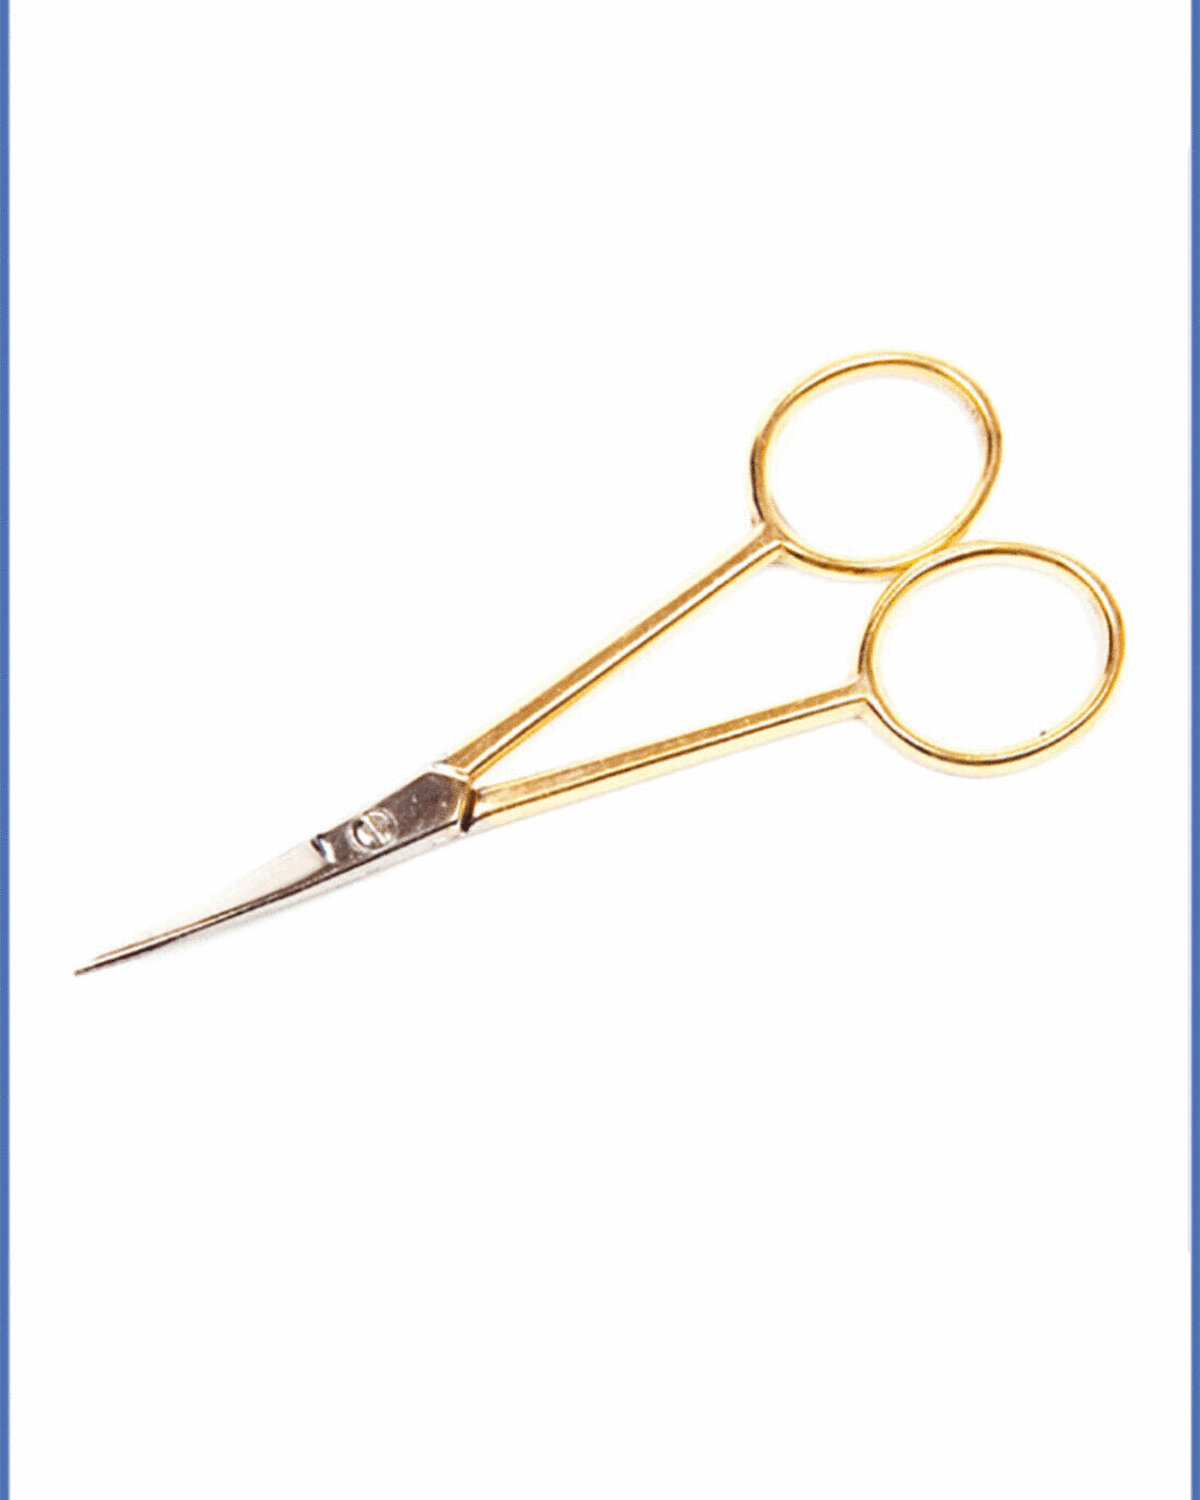 GOLD PLATED SCISSORS